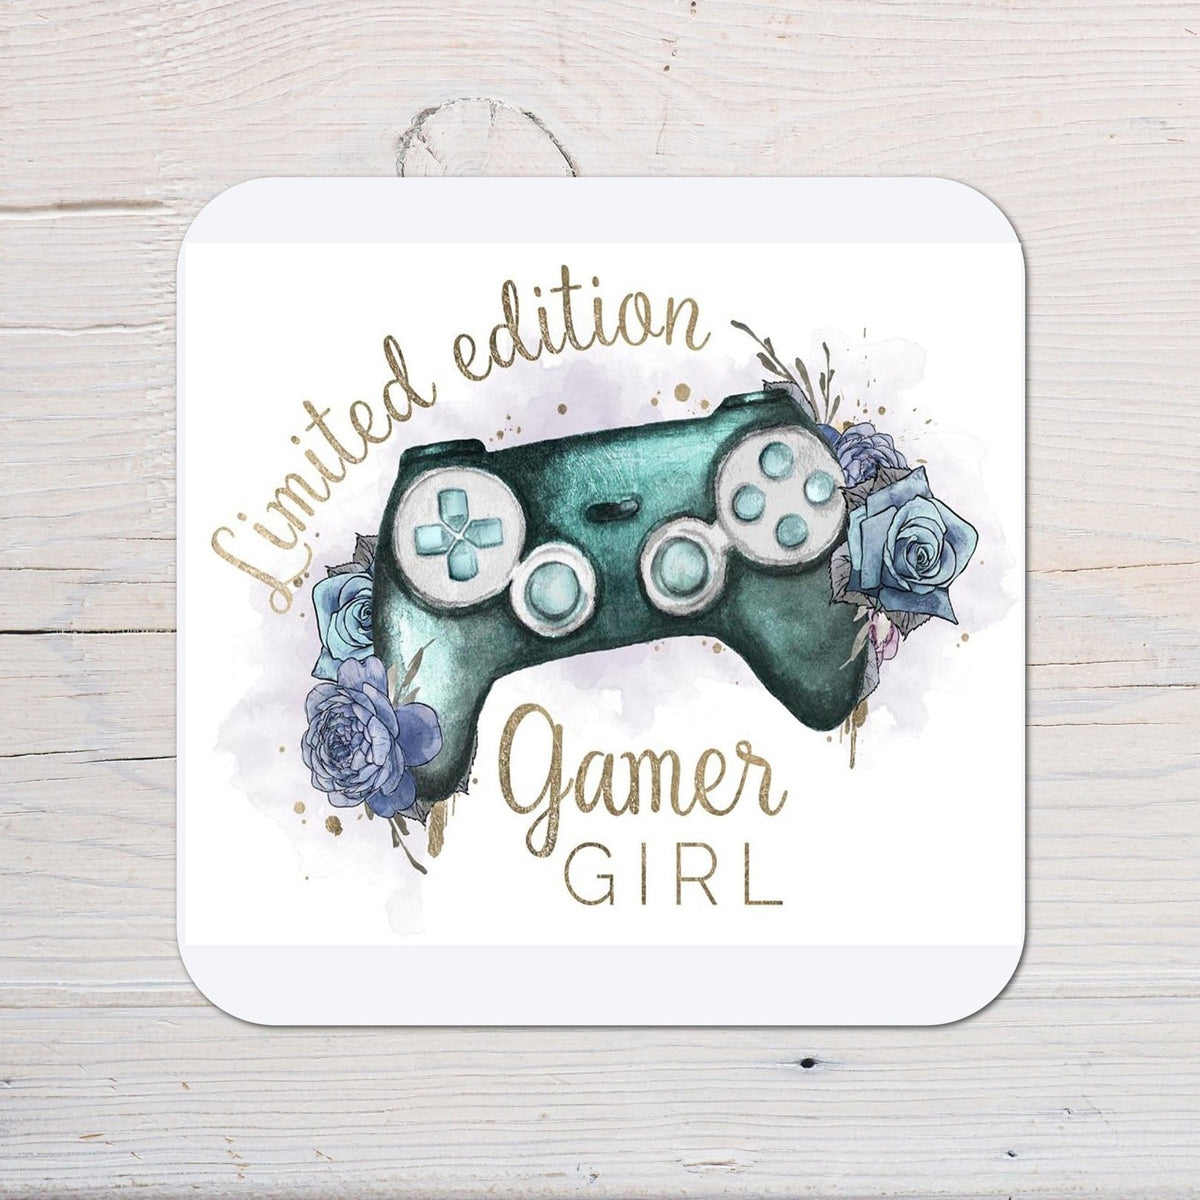 Gamer Girl Limited Edition Teal Coaster personalised with any wording - Gamers, Gaming - Rainbowprint.uk